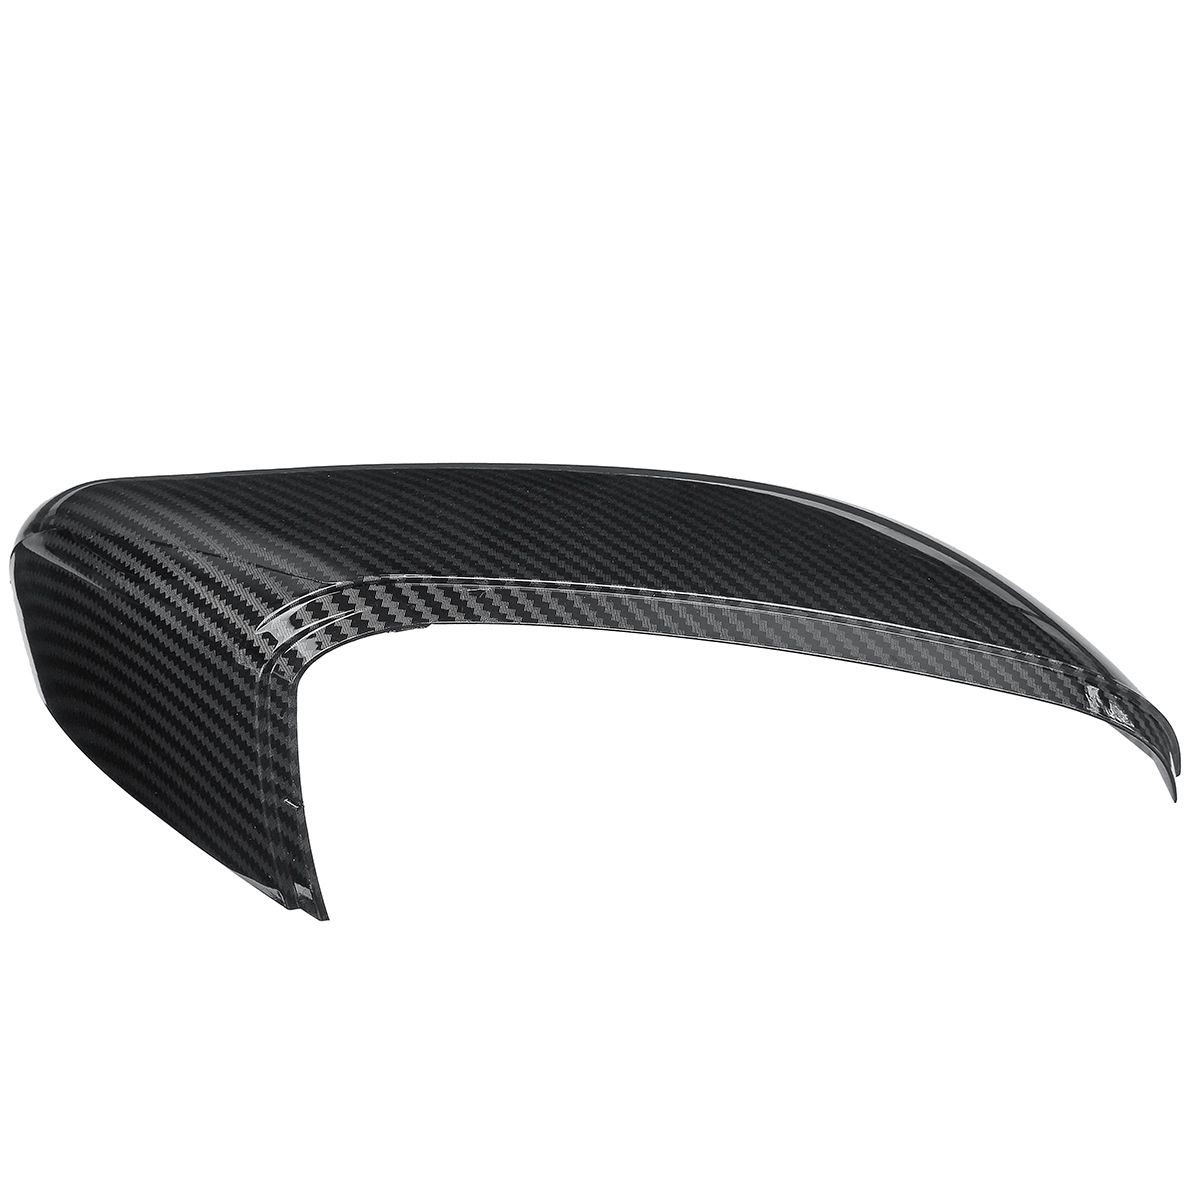 Car-LeftRight-Rearview-Door-Wing-Mirror-Cover-Carbon-Fiber-For-VW-Golf-Mk6-2009-2013-1684593